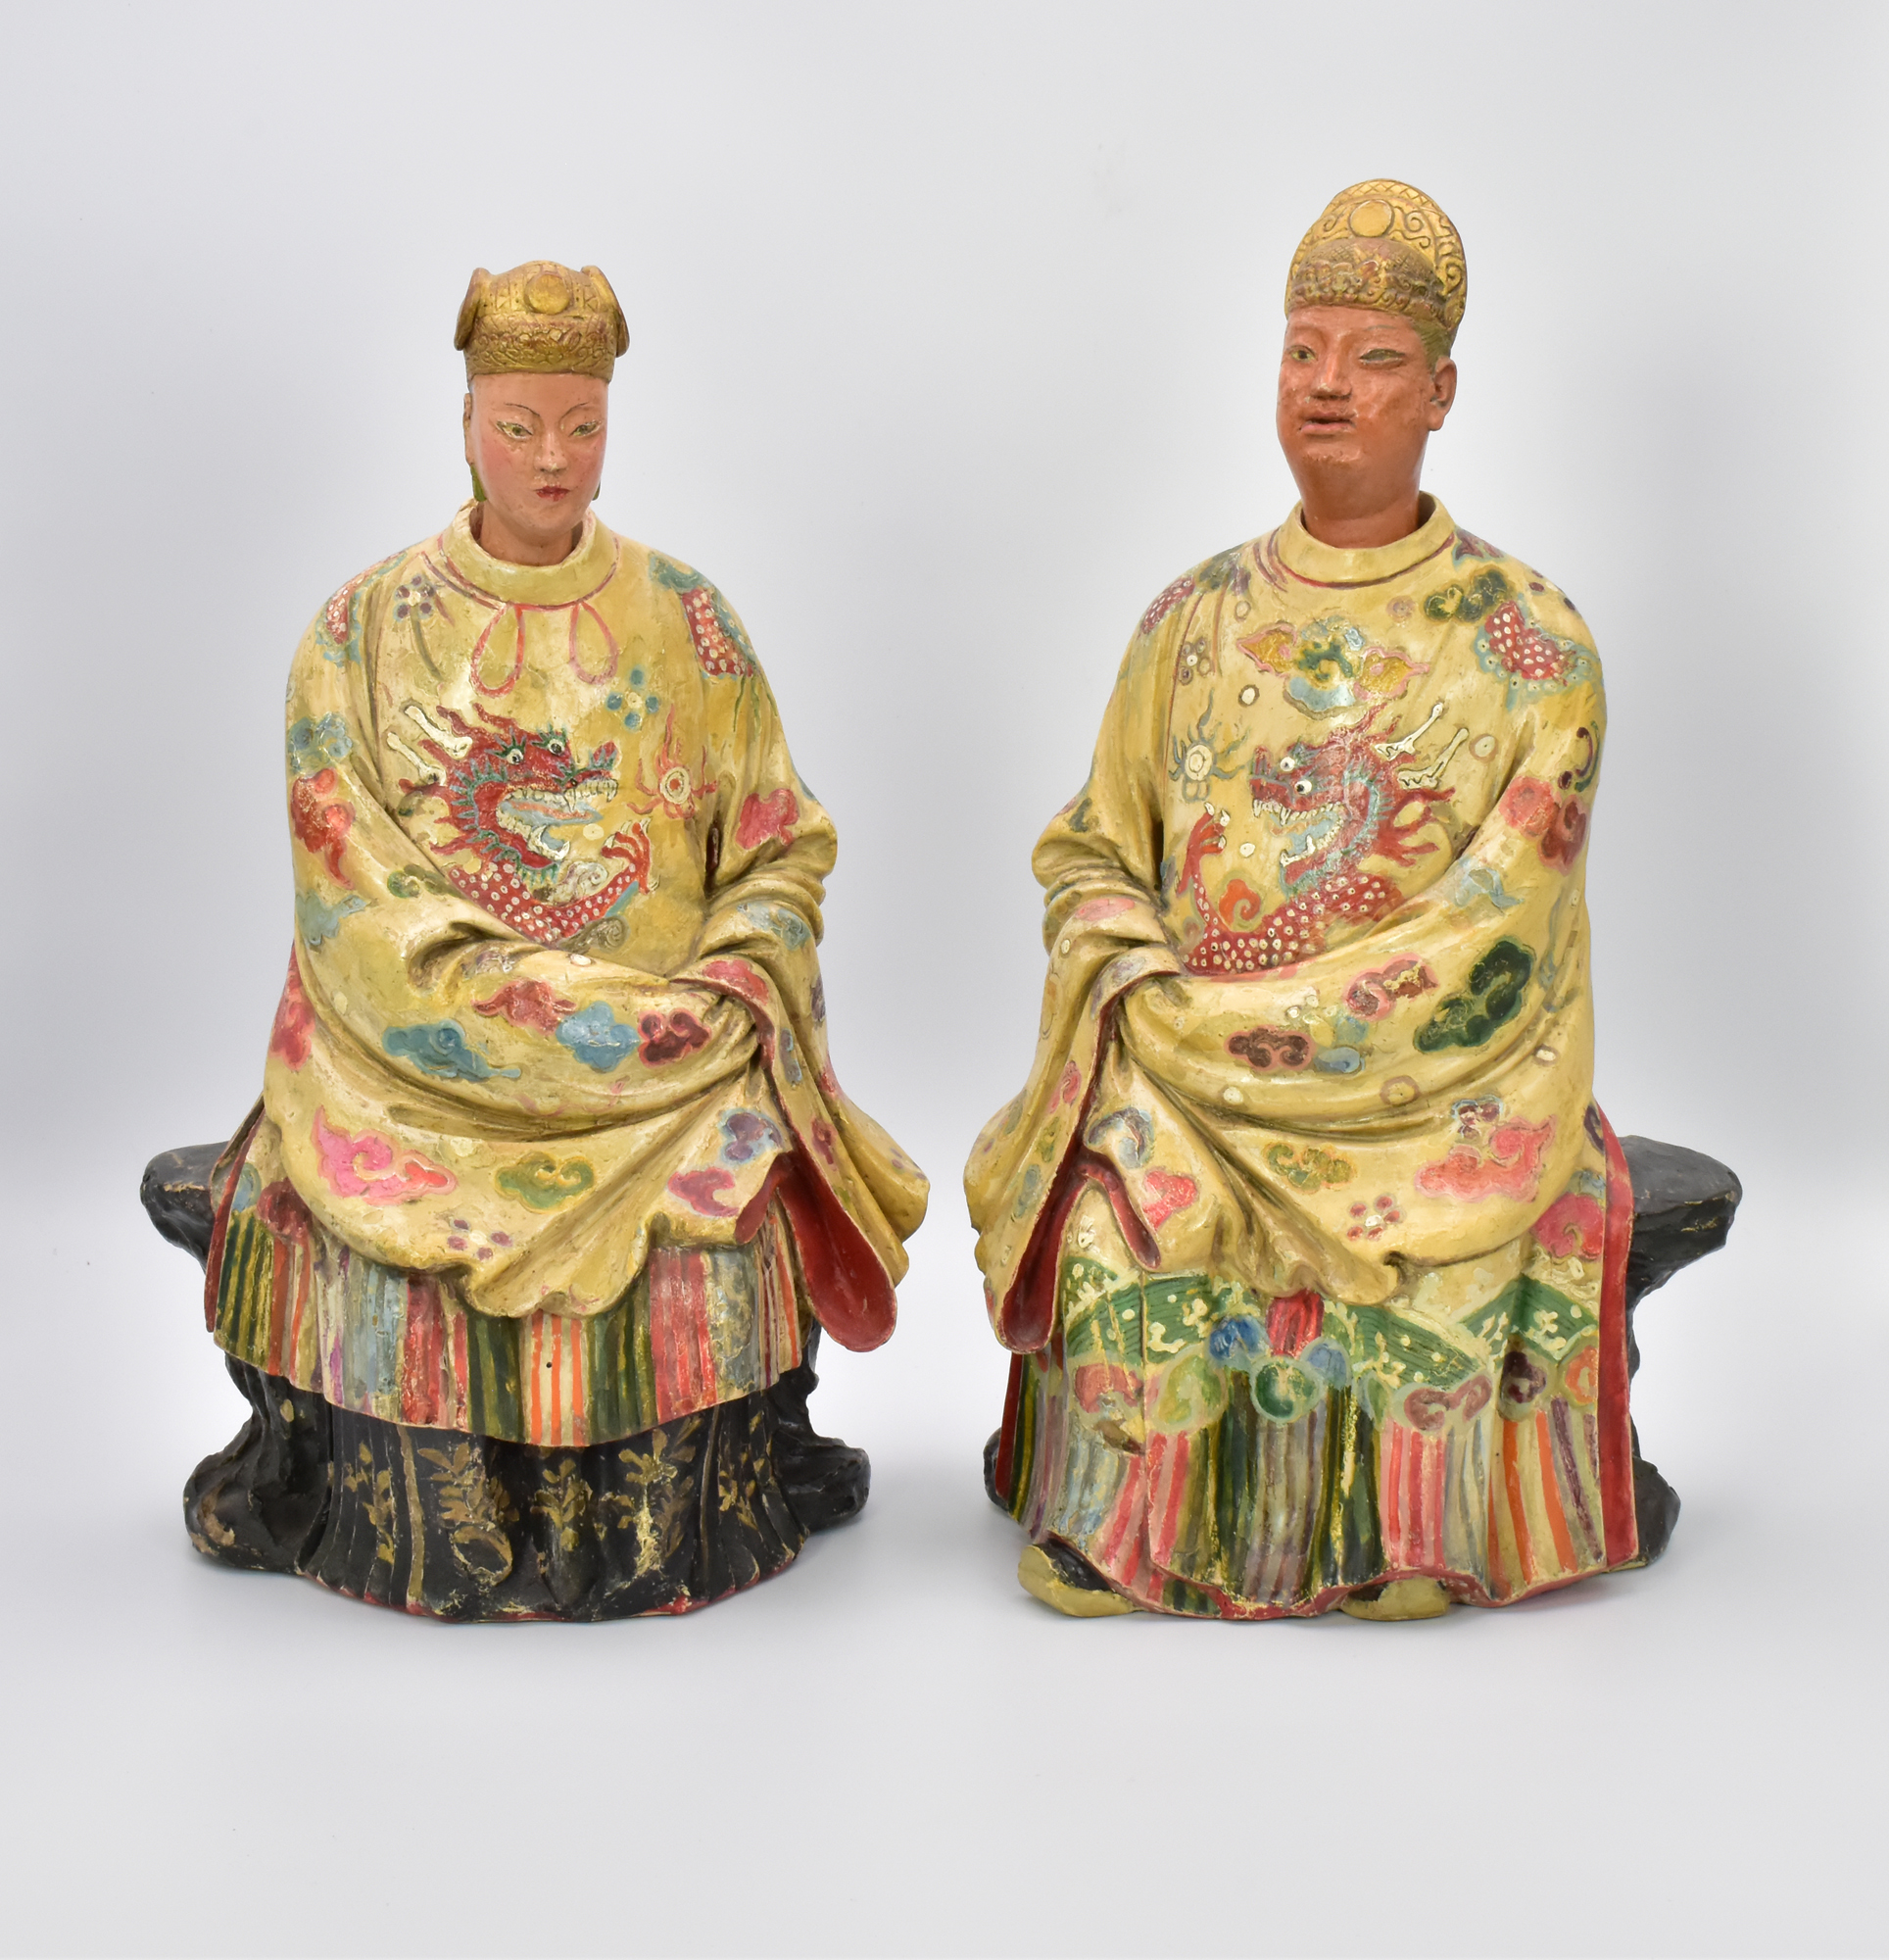 A PAIR OF CHINESE EXPORT NODDING-HEAD CLAY FIGURES, QING DYNASTY, QIANLONG PERIOD, 1736 – 1795